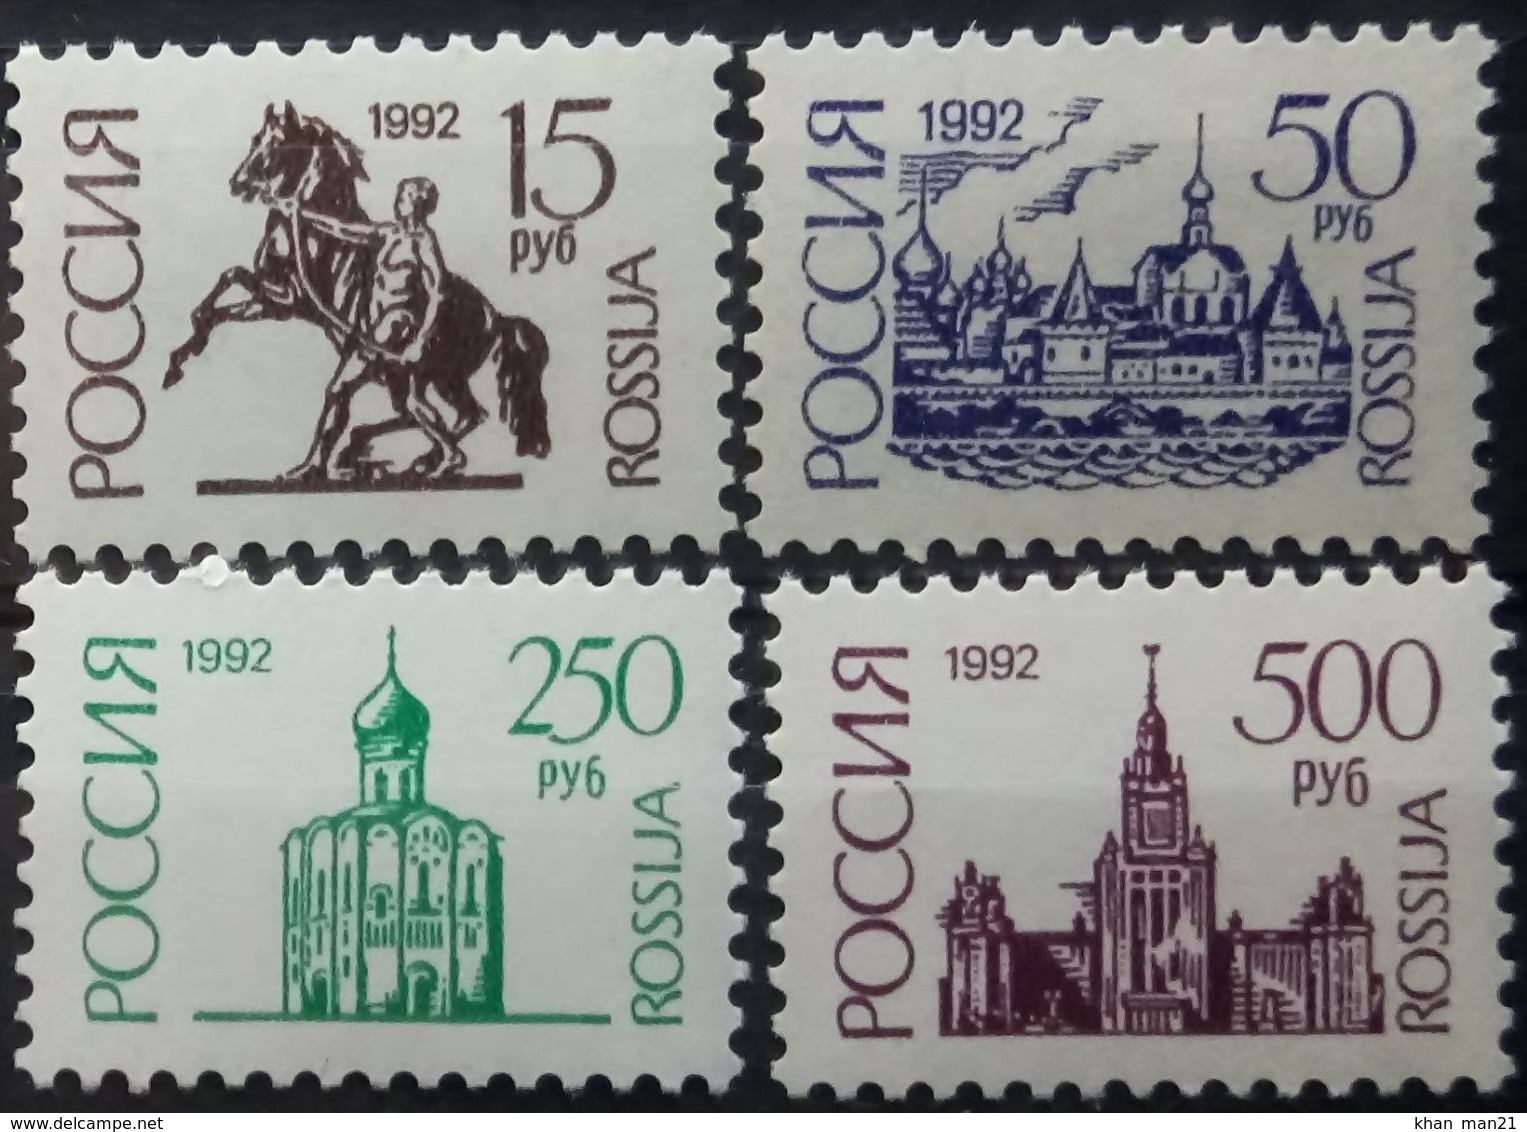 Russia, 1992, Mi. 278 IAw-81 IAw, The First Issue Of Standard Russian Federation Stamps, MNH - Unused Stamps